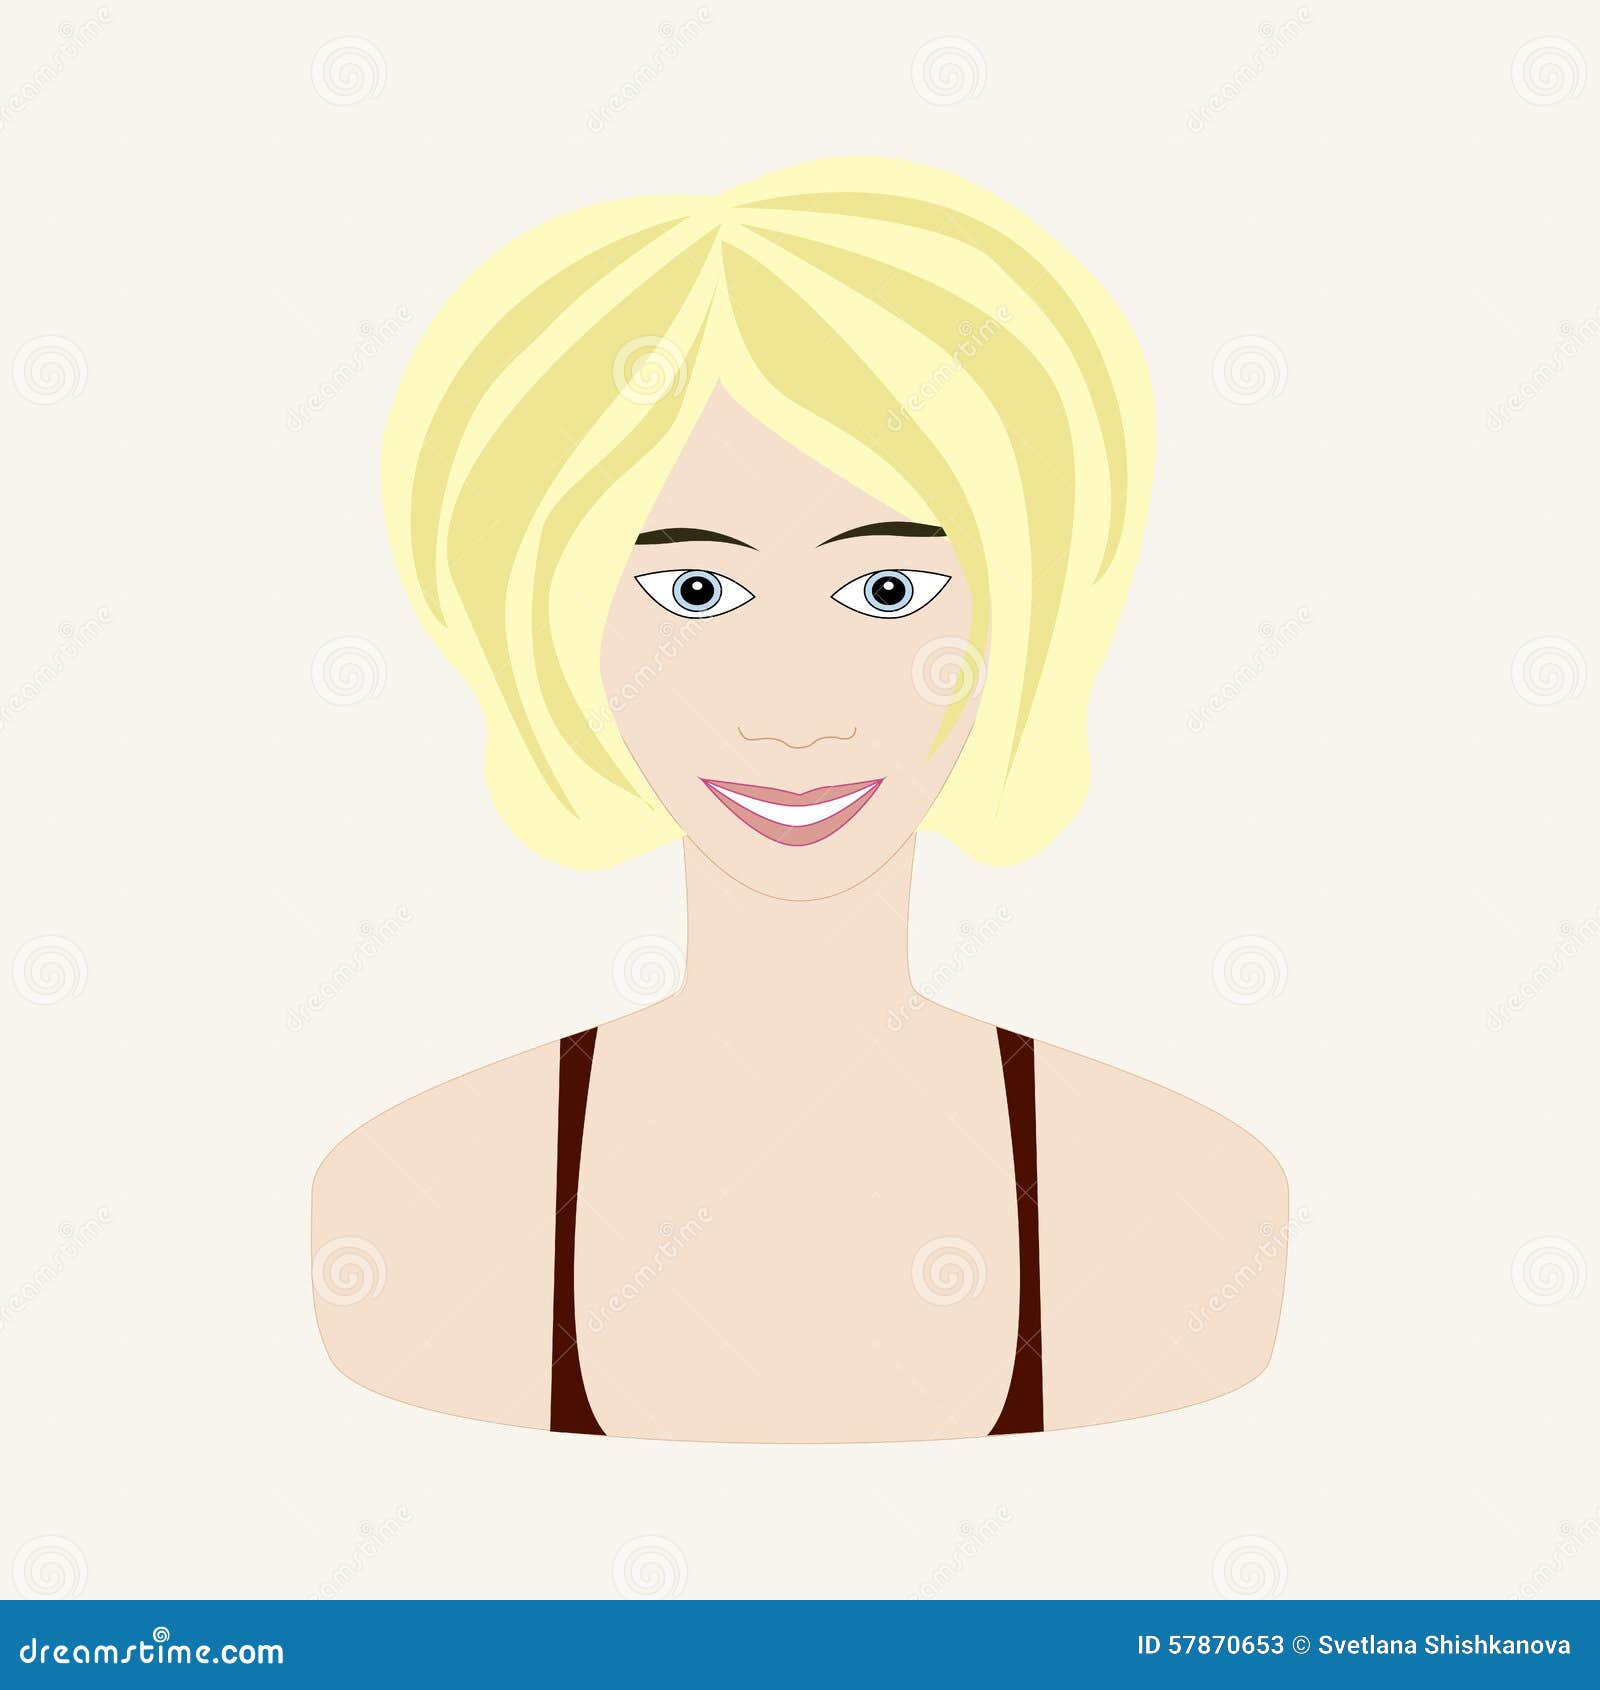 Vector Illustration Of Girl With Blonde Hair And Blue Eyes. Stock